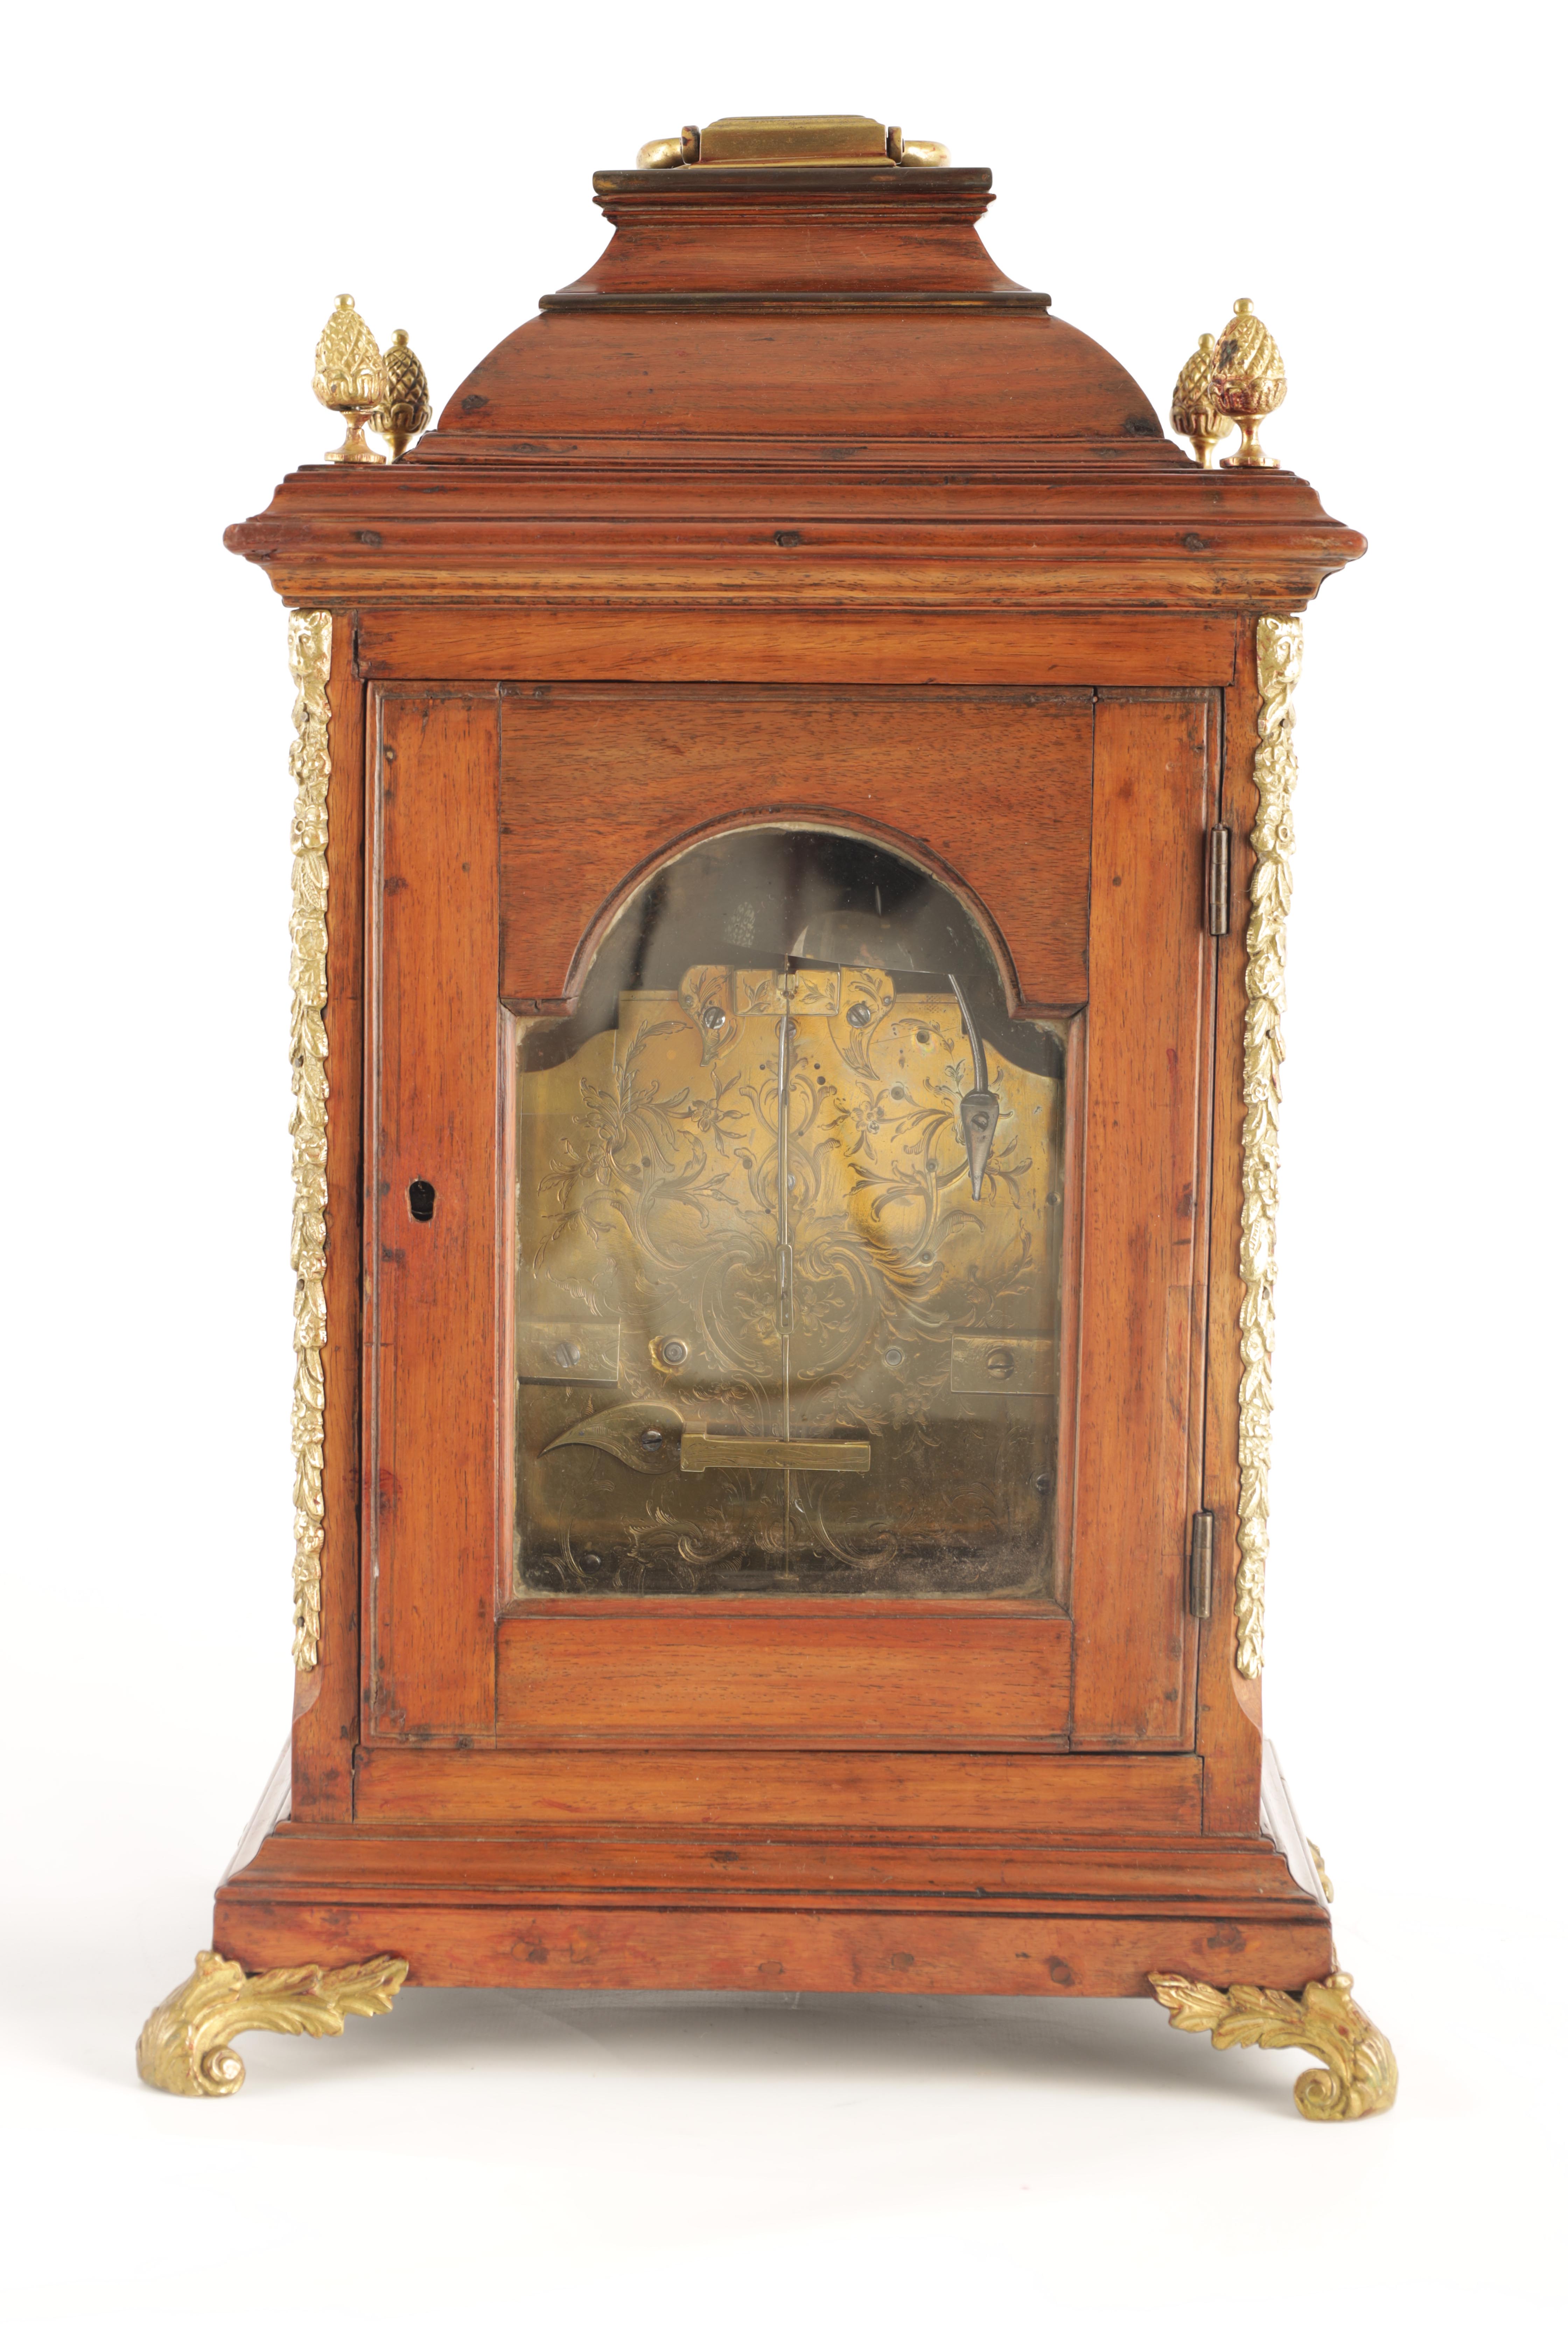 ANDREW DICKIE, LONDON A GEORGE III AUTOMATION VERGE BRACKET CLOCK the ormolu-mounted mahogany case - Image 7 of 10